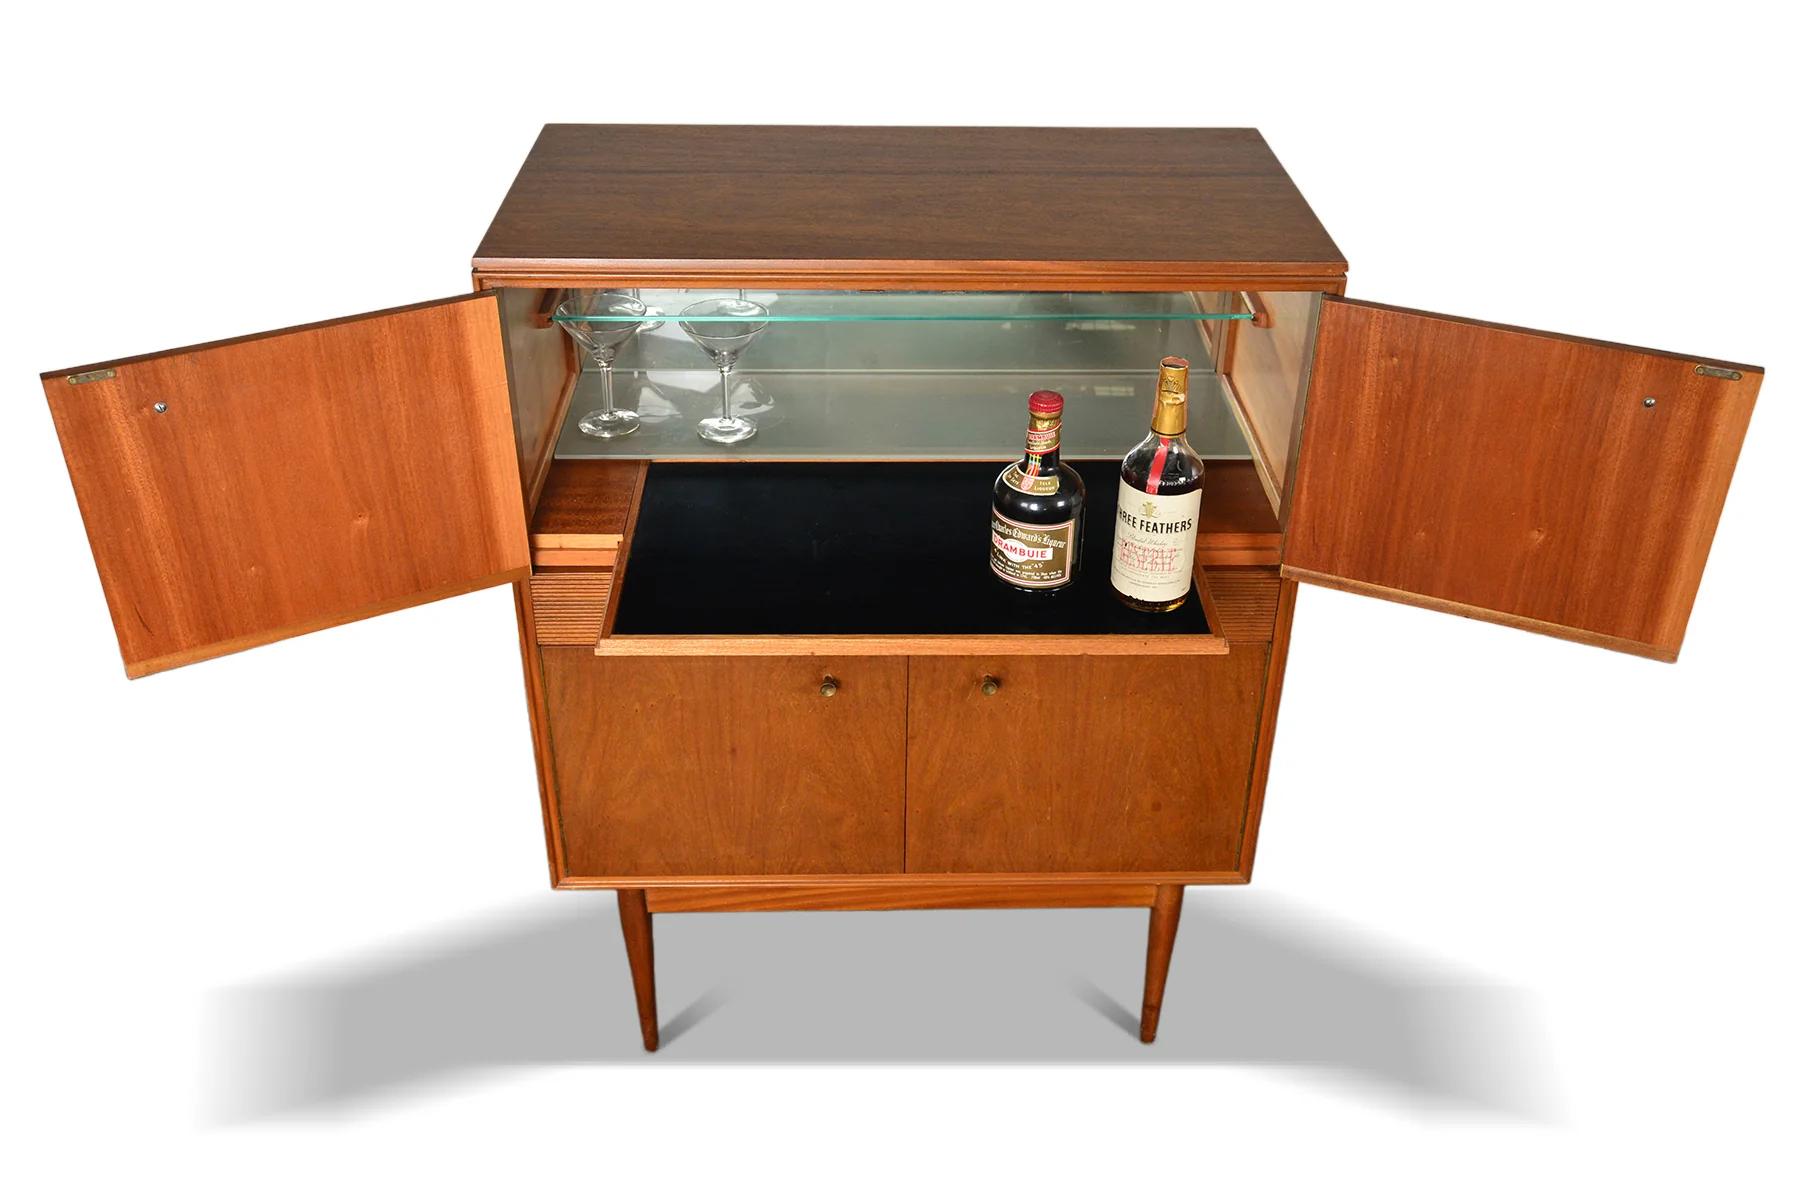 Mahogany Cocktail Bar By Robert Heritage In Excellent Condition For Sale In Berkeley, CA